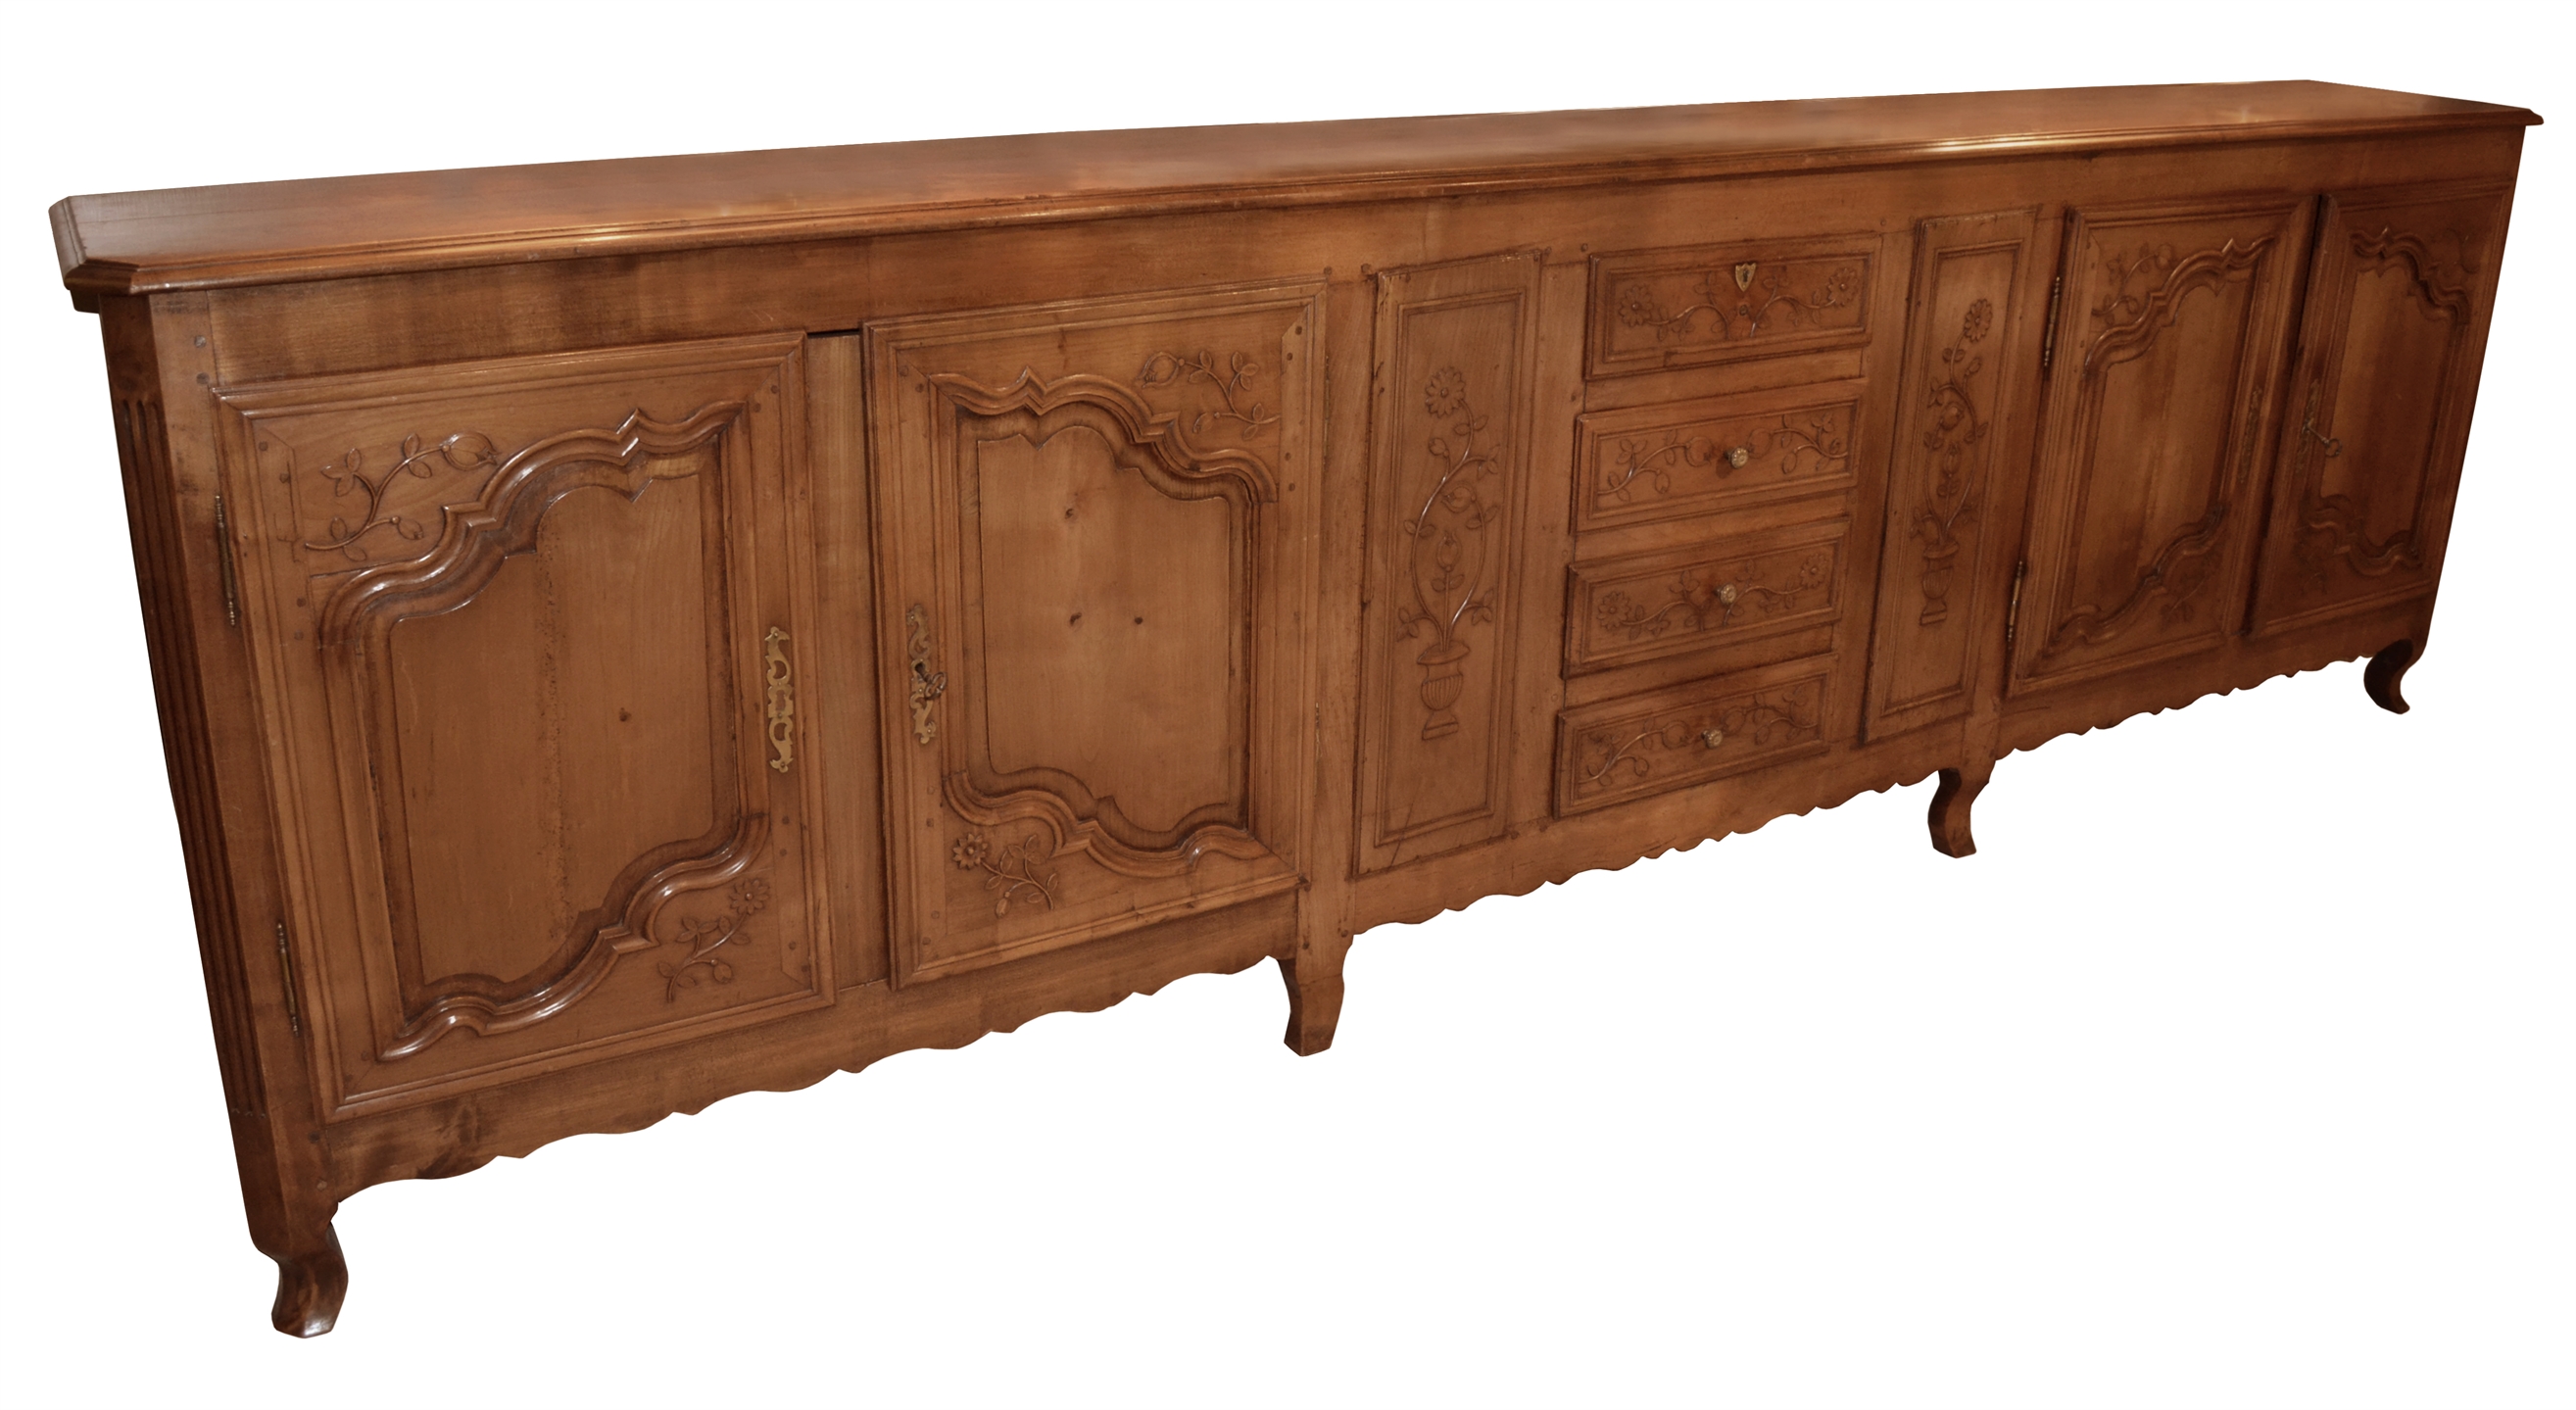 123/2086 - Picardy Fruitwood Buffet